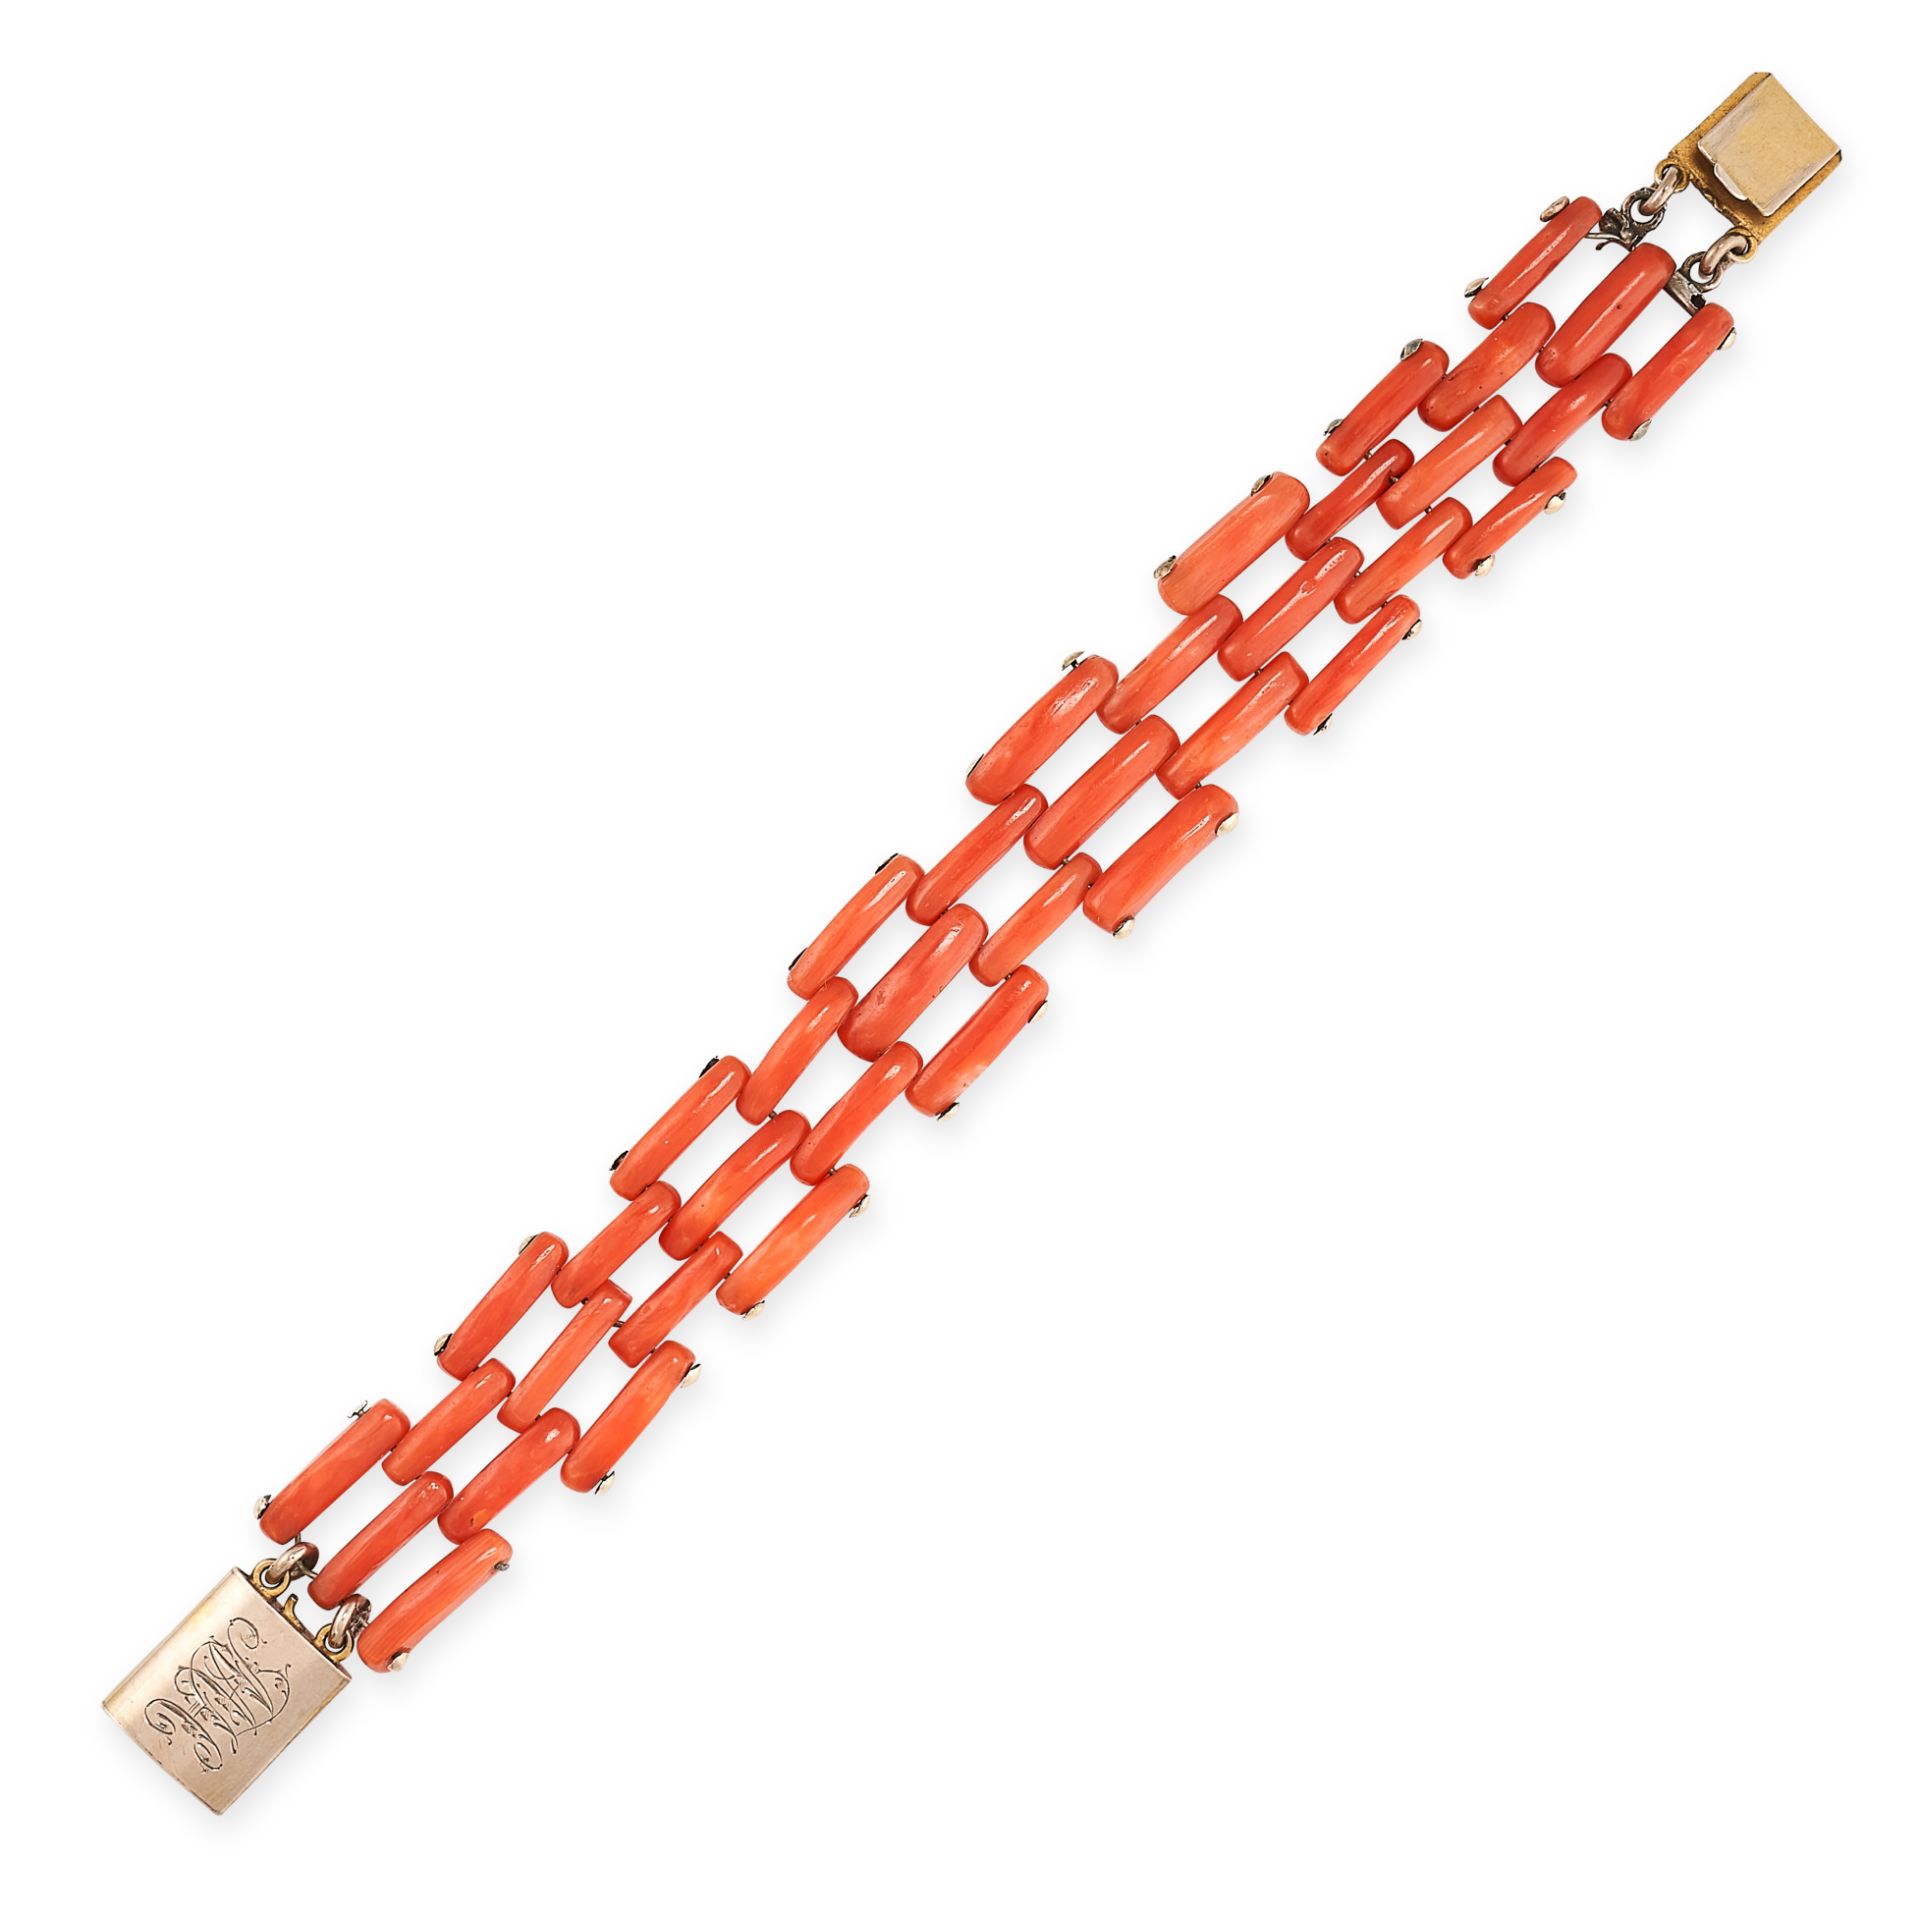 AN ANTIQUE CORAL GATE BRACELET, 19TH CENTURY  Polished coral  Inscribed 'MH'  No assay marks  Length